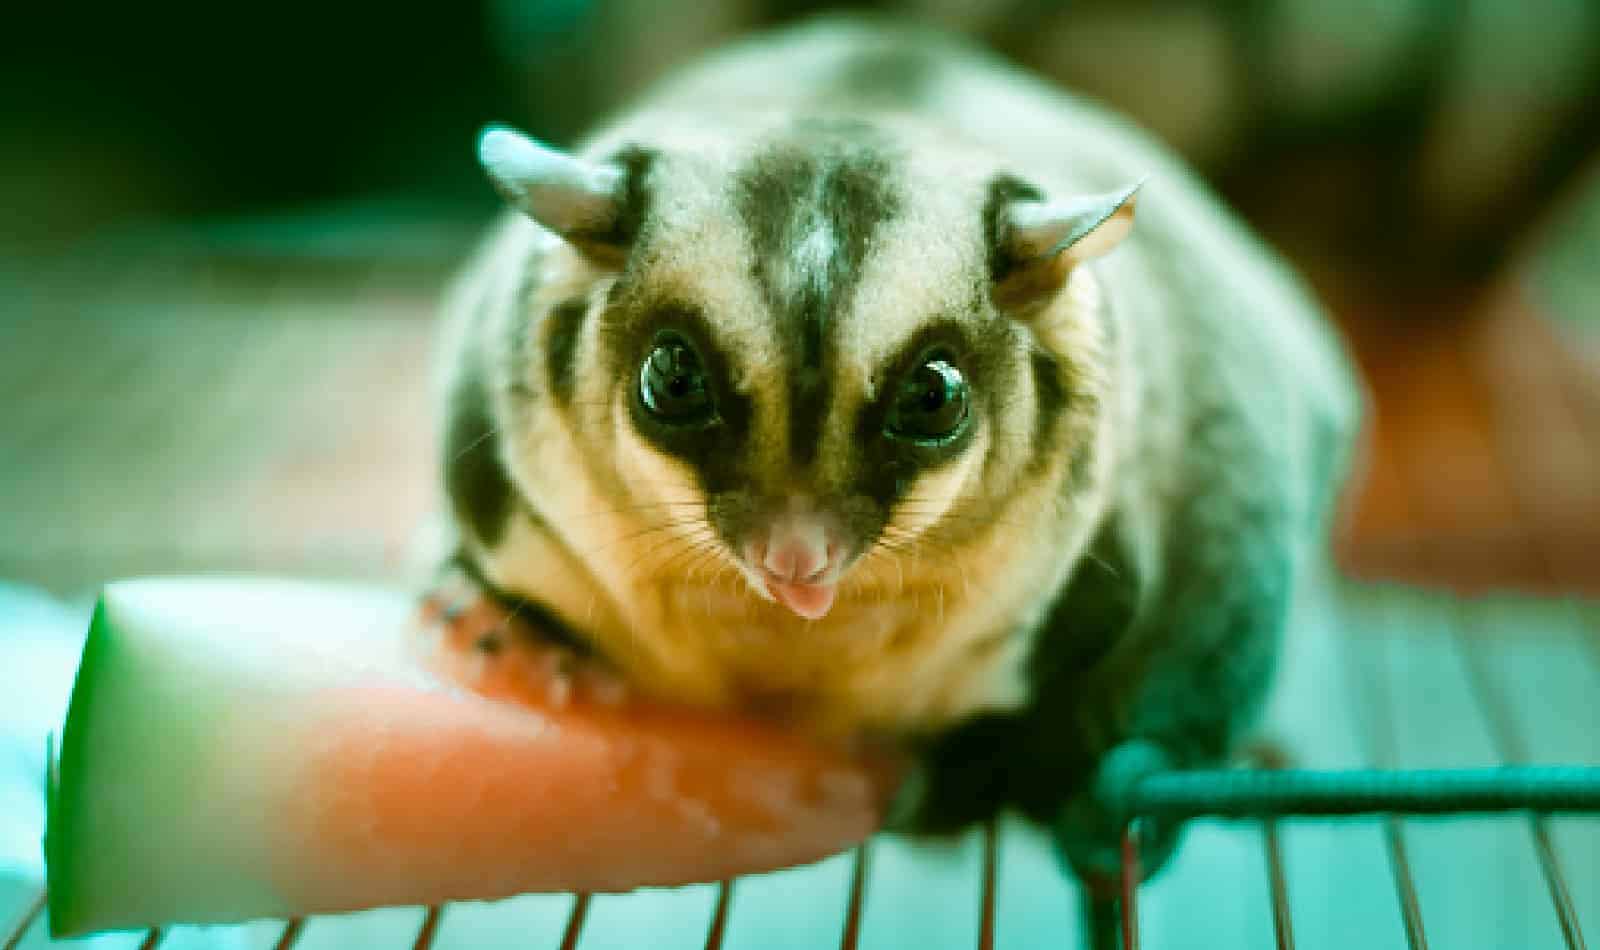 Looking for some amazing healthy sugar glider treats that you can buy online? Check out our top 10 picks that our own gliders love!